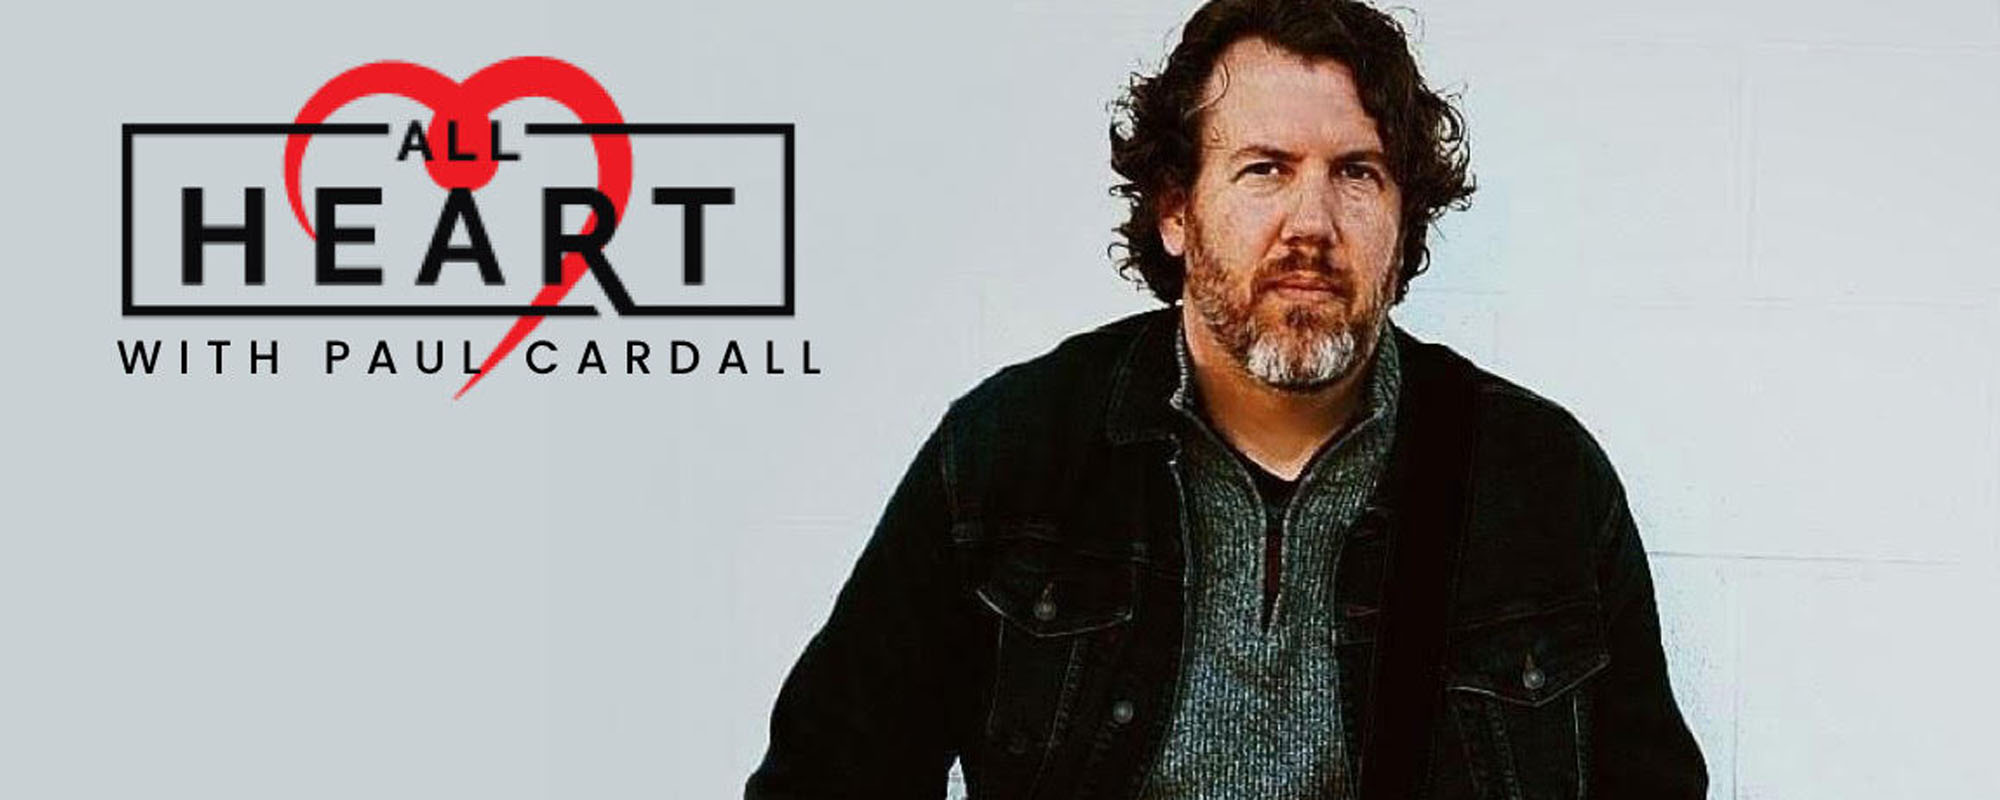 Utah Musician Rich Bischoff Reminisces on Latest Episode of ‘All Heart’ Podcast